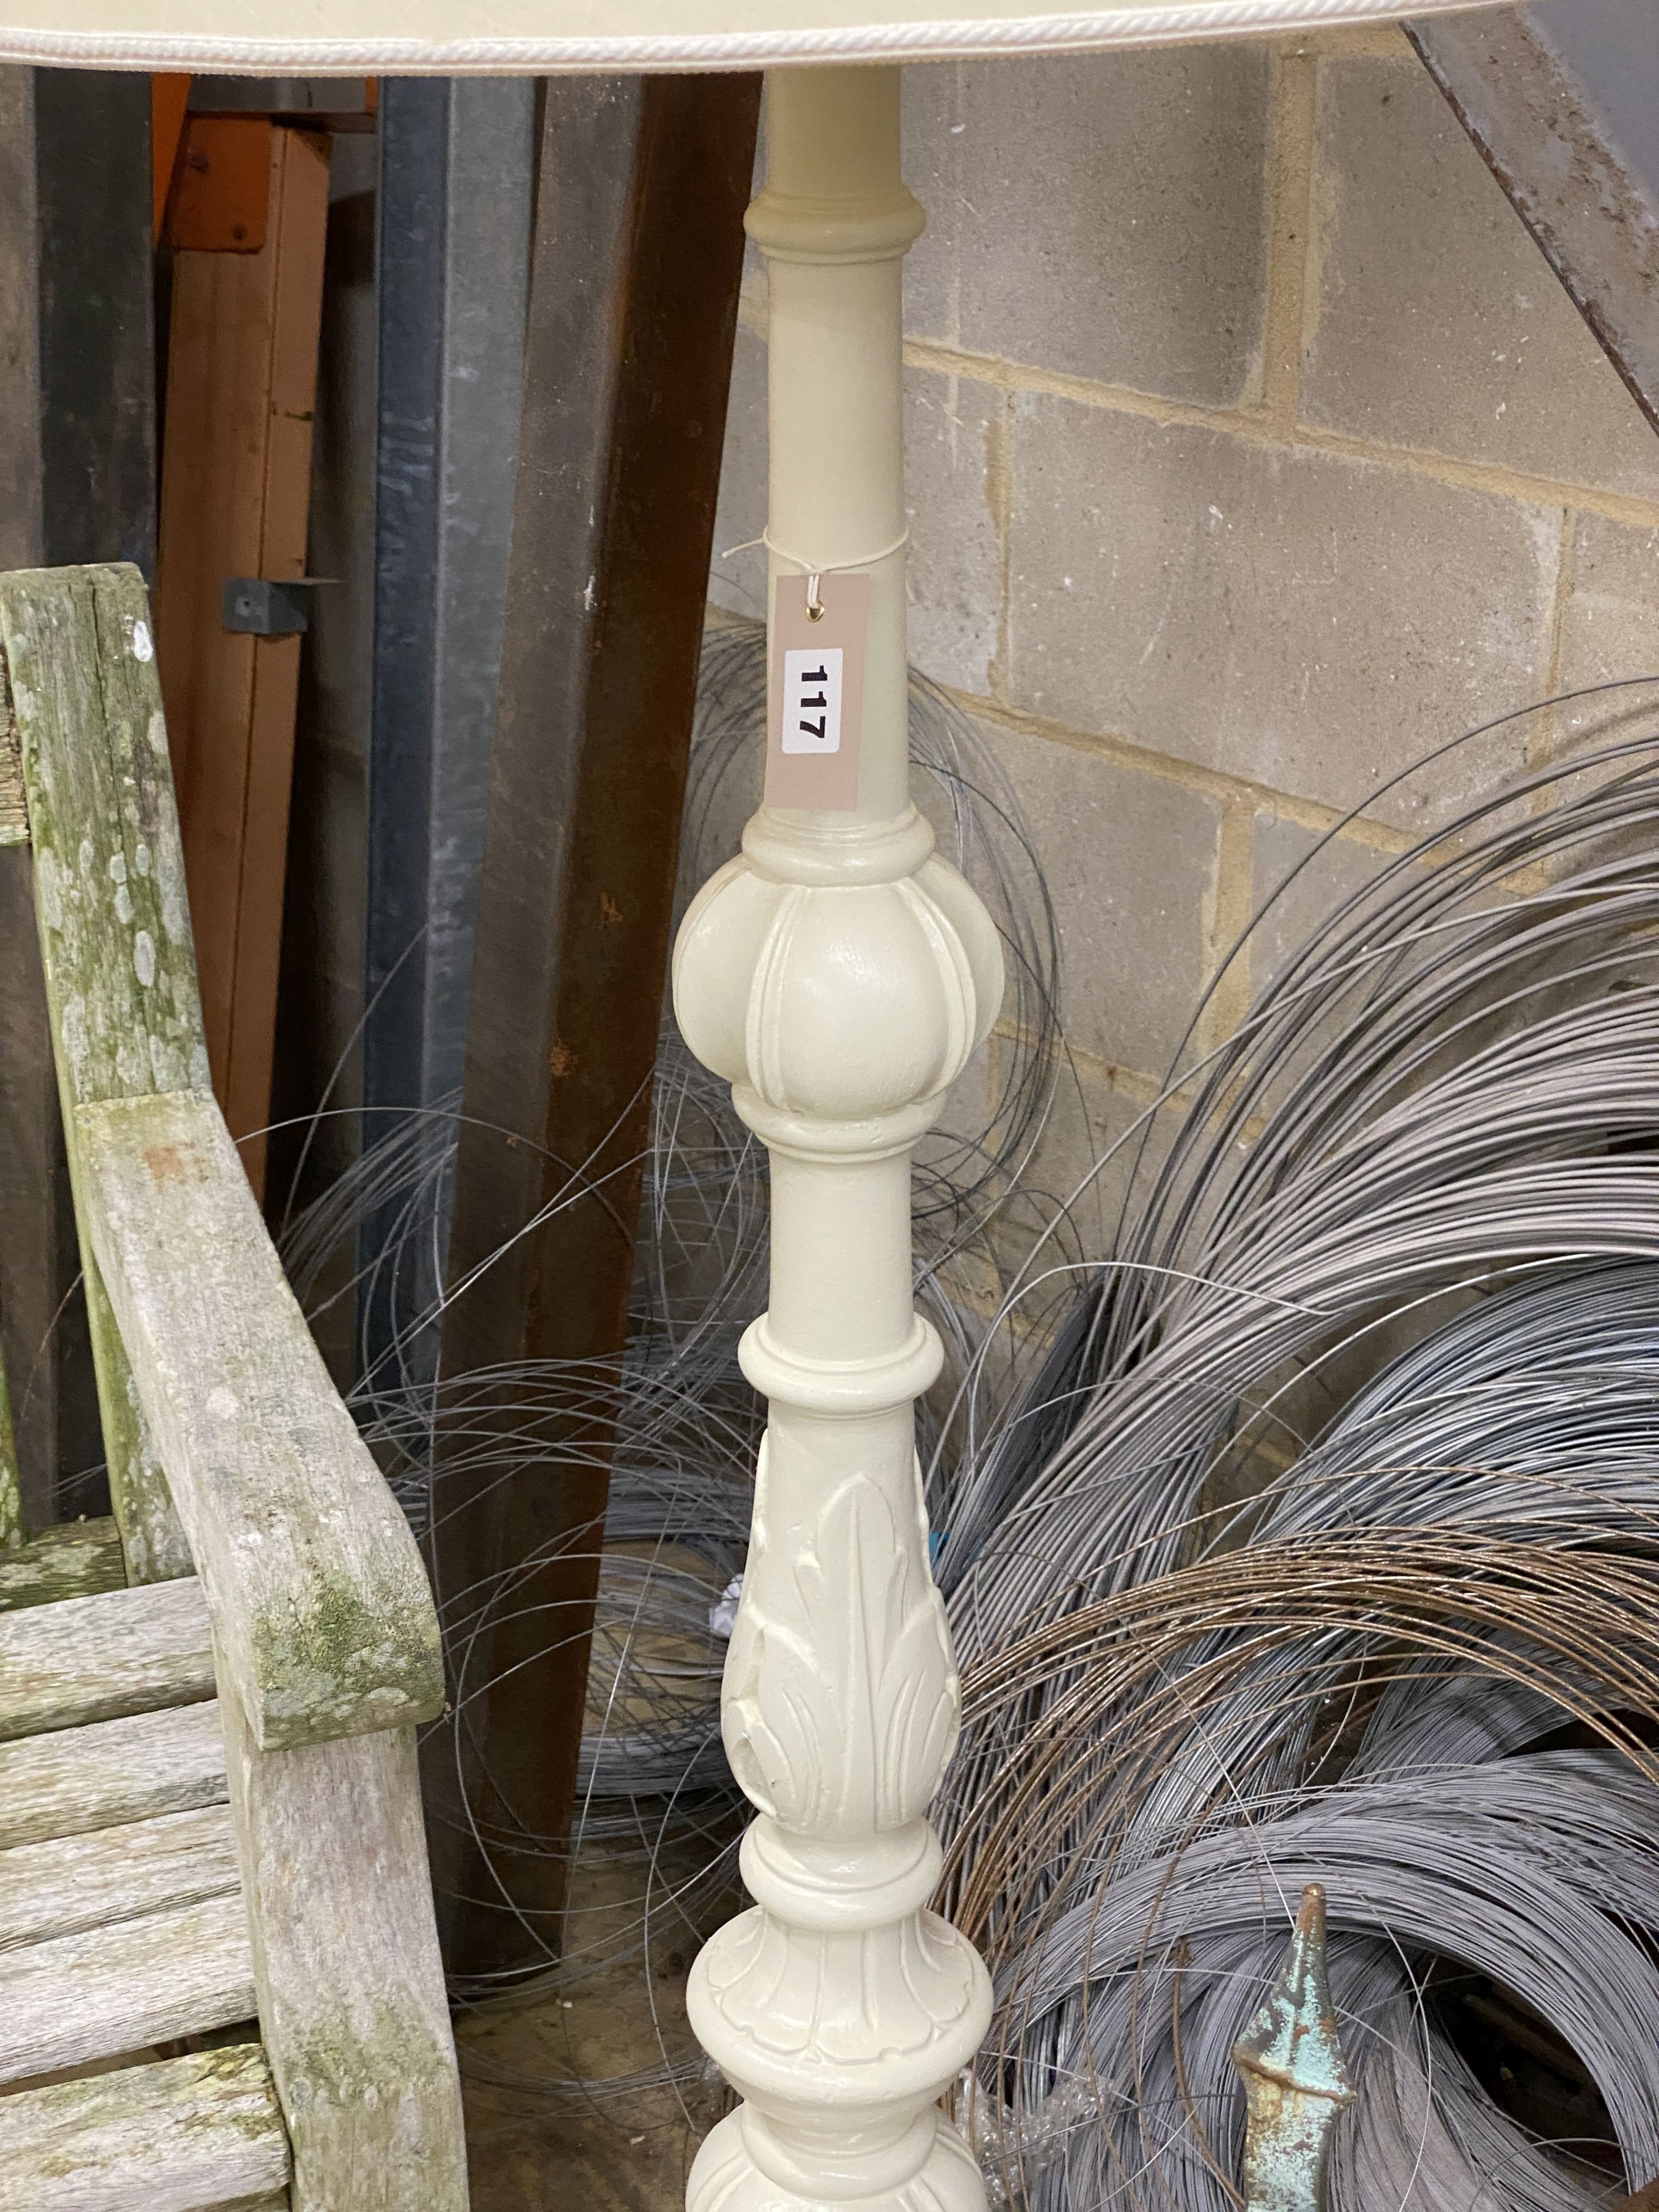 A white painted standard lamp, height 134cm